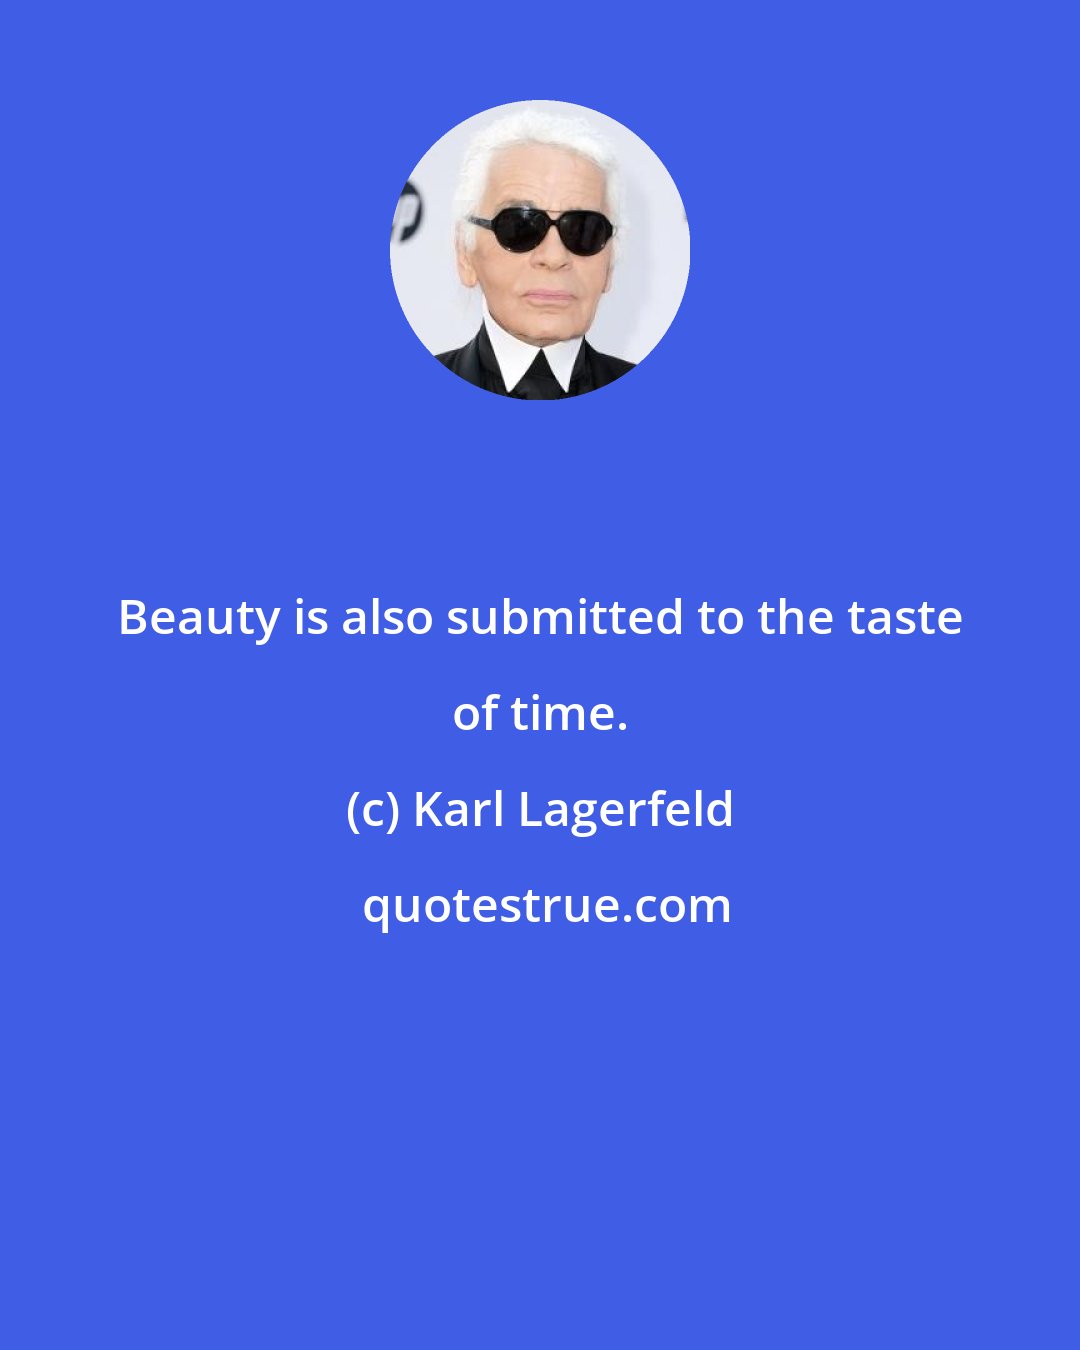 Karl Lagerfeld: Beauty is also submitted to the taste of time.